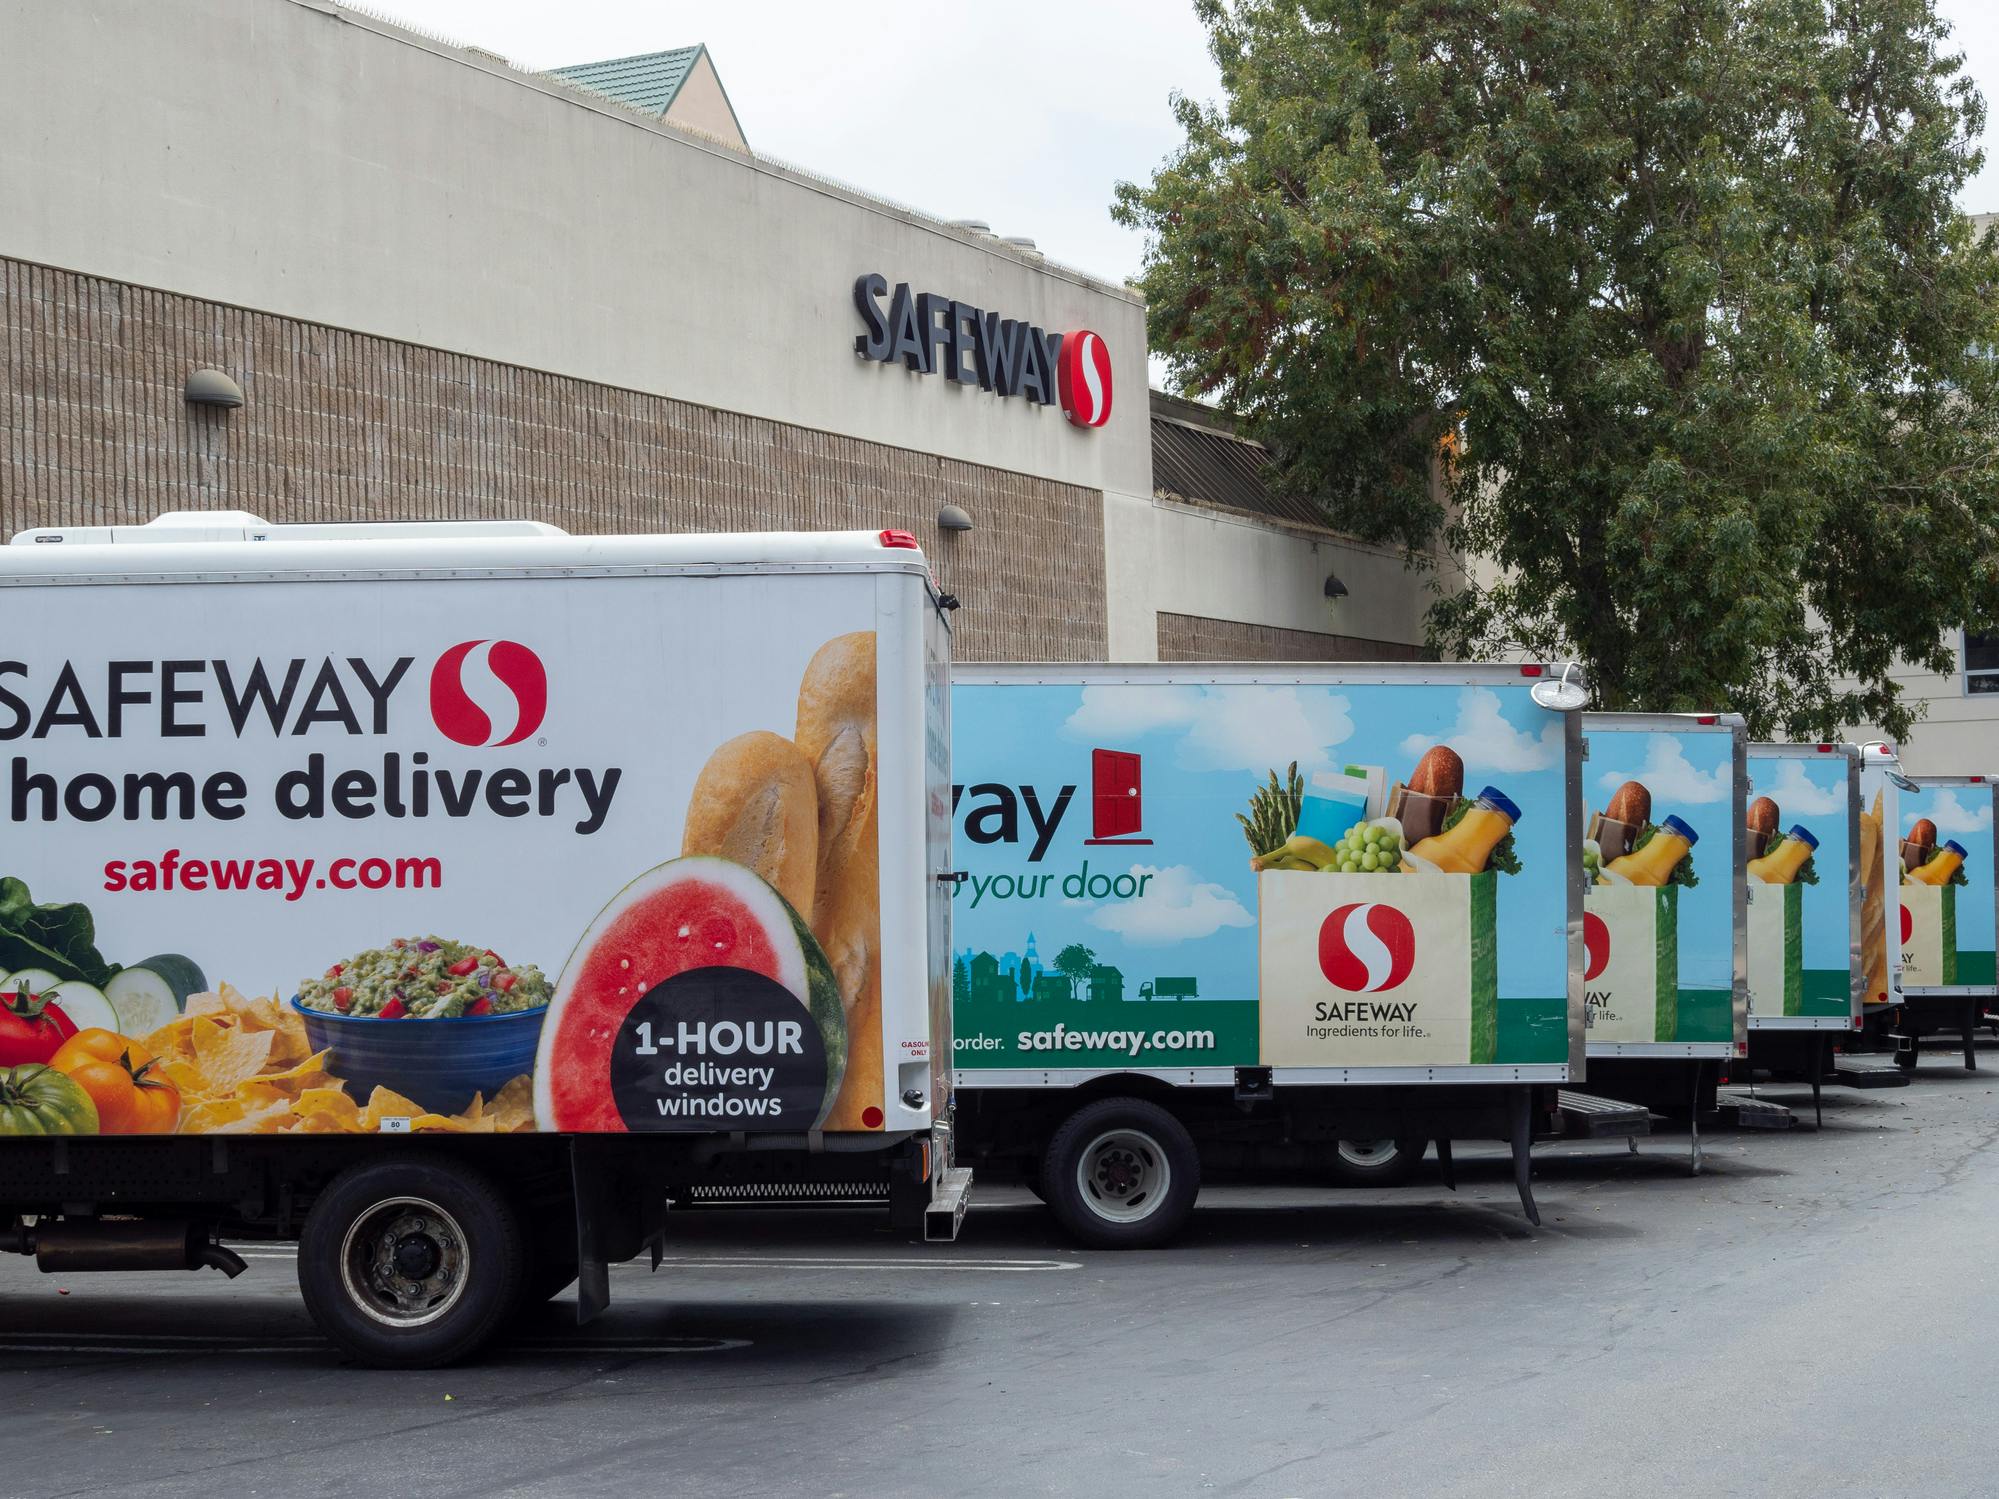 Safeway Grocery Delivery 1589493330 1589493330 ?auto=compress,format&fit=crop